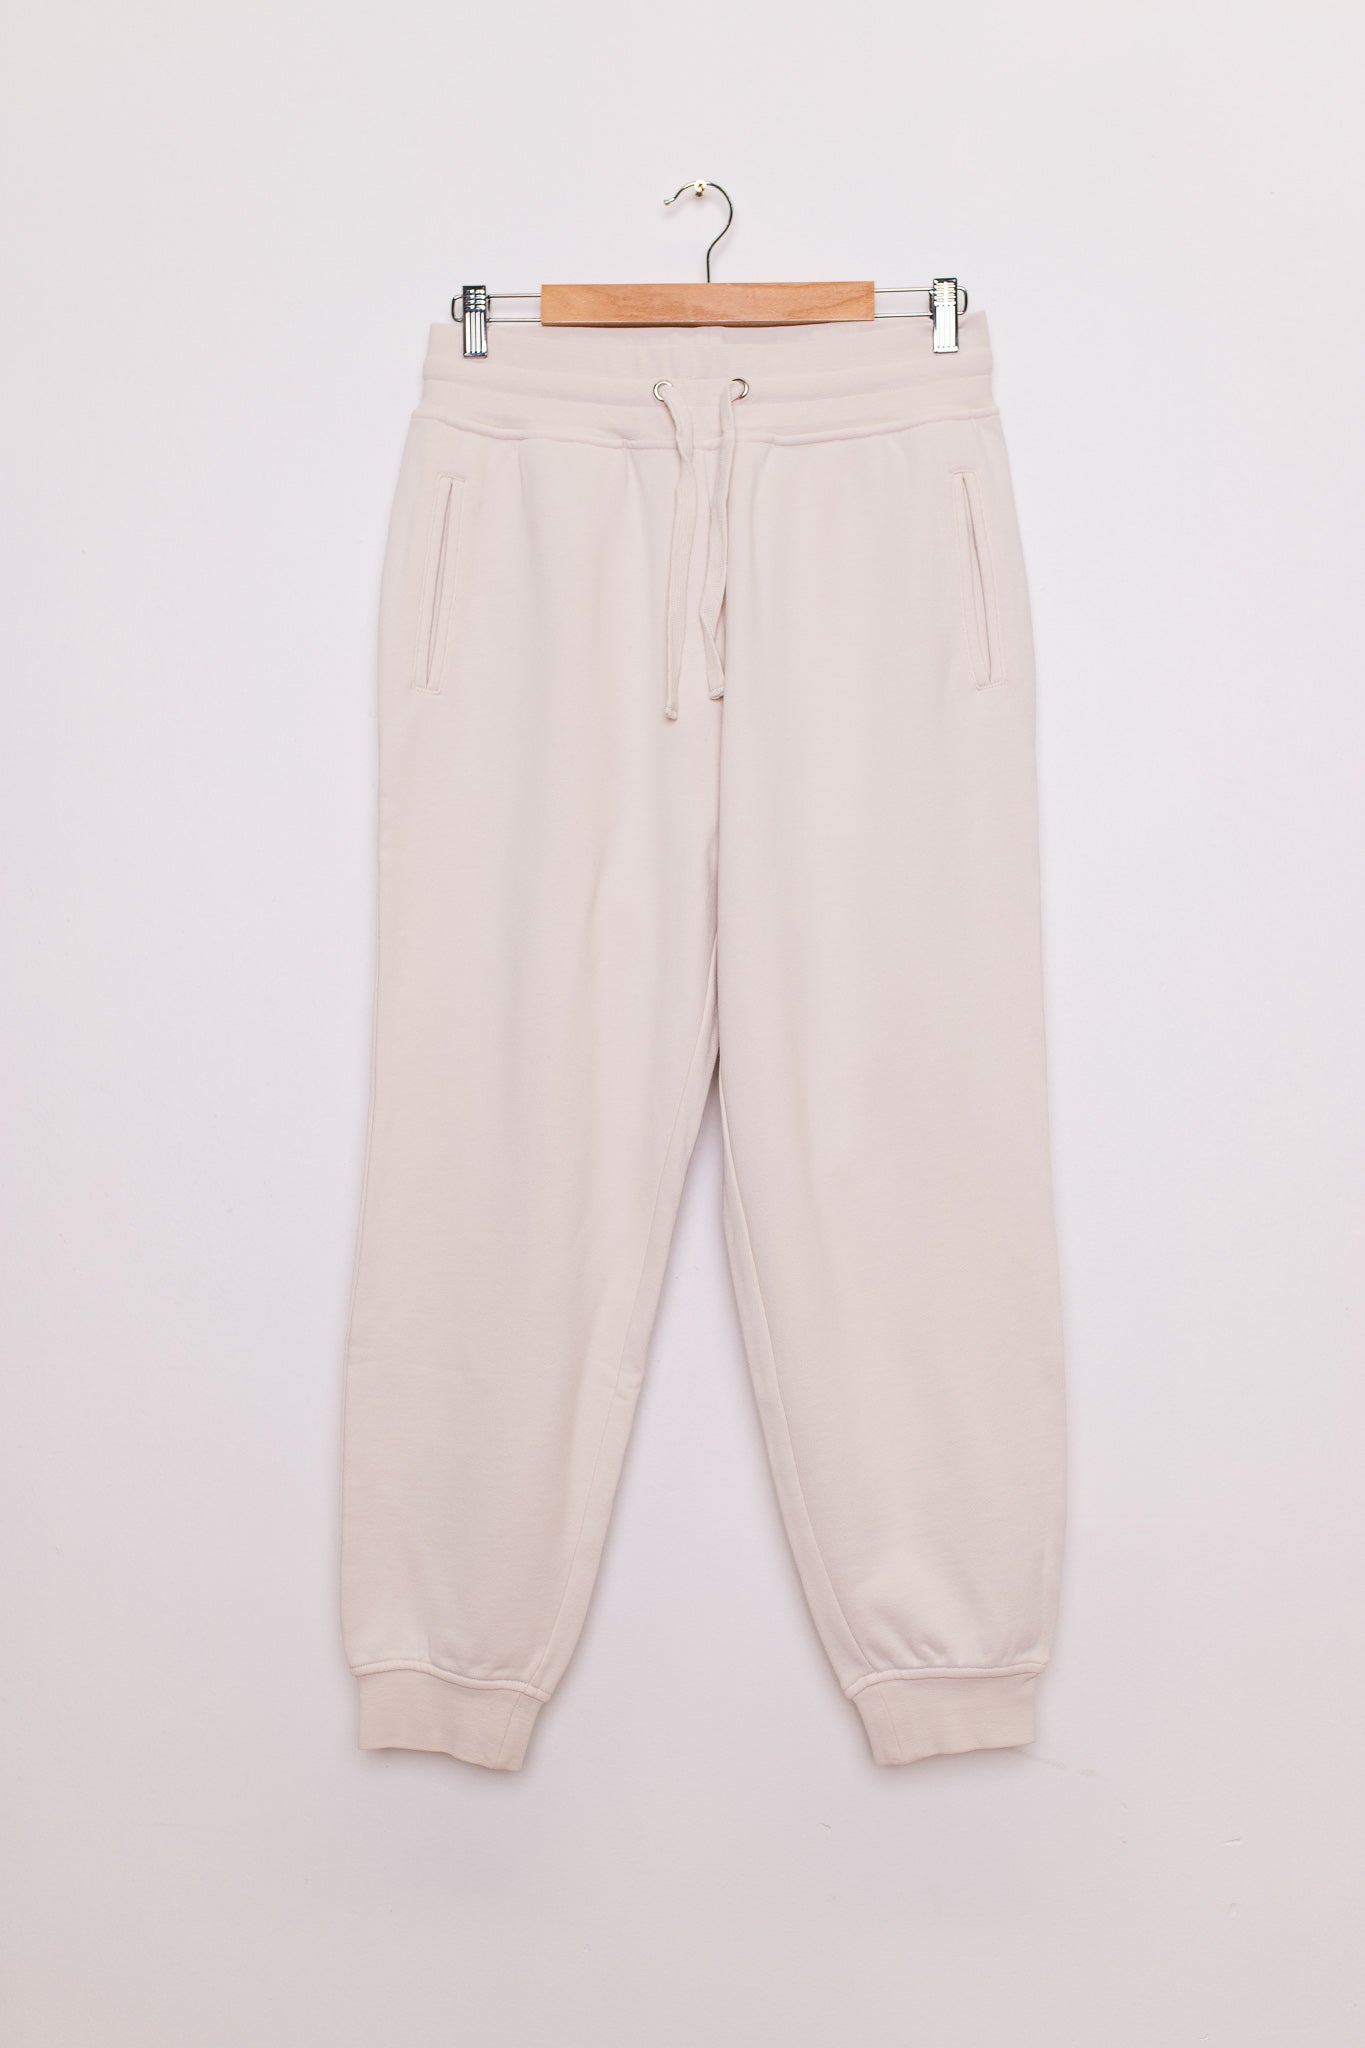 Oyster Lounge Pant 2 for $50 bundle